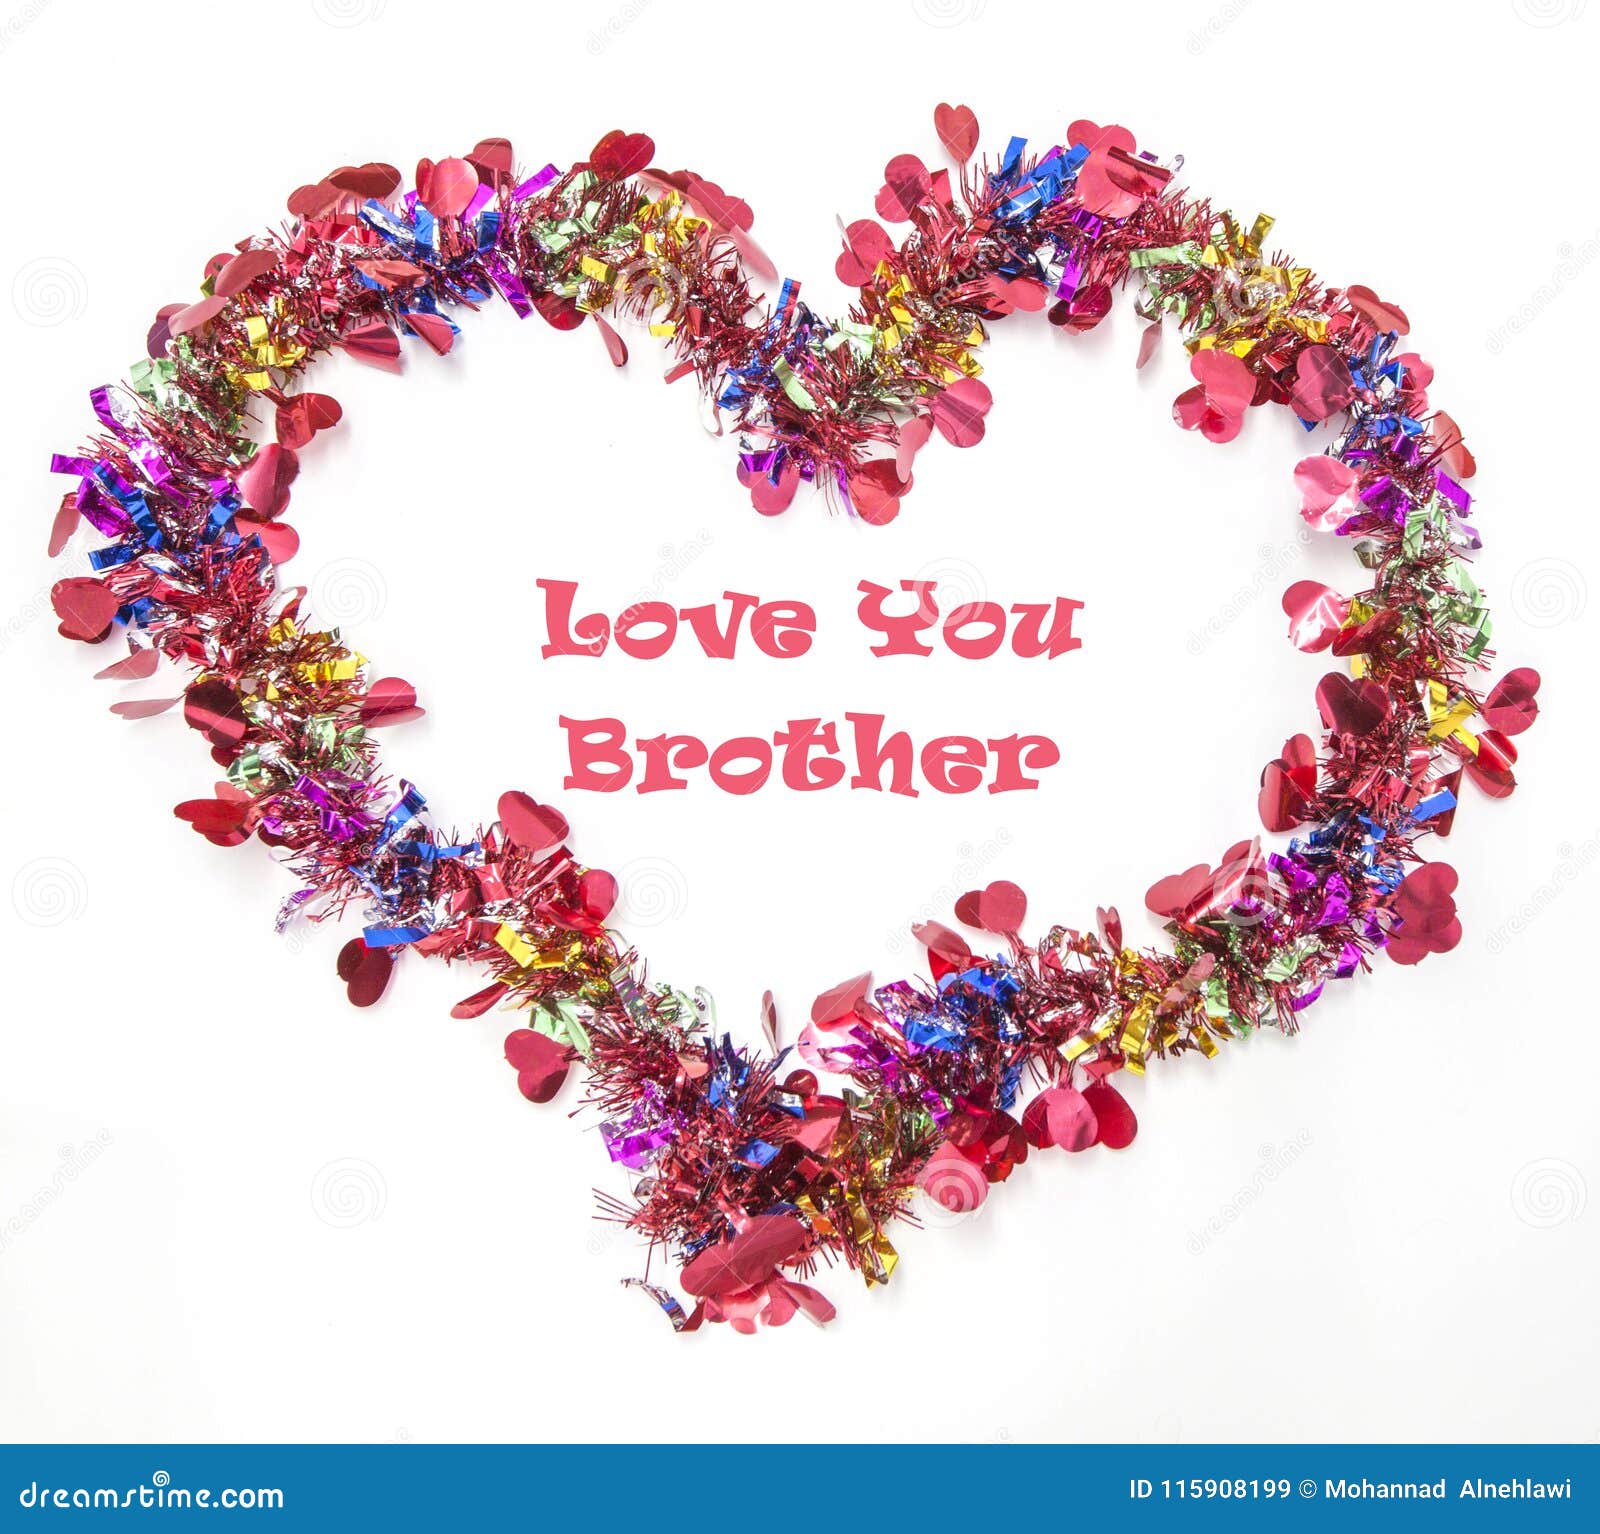 Greeting Card To Express Your Love for Your Brother Stock Image ...